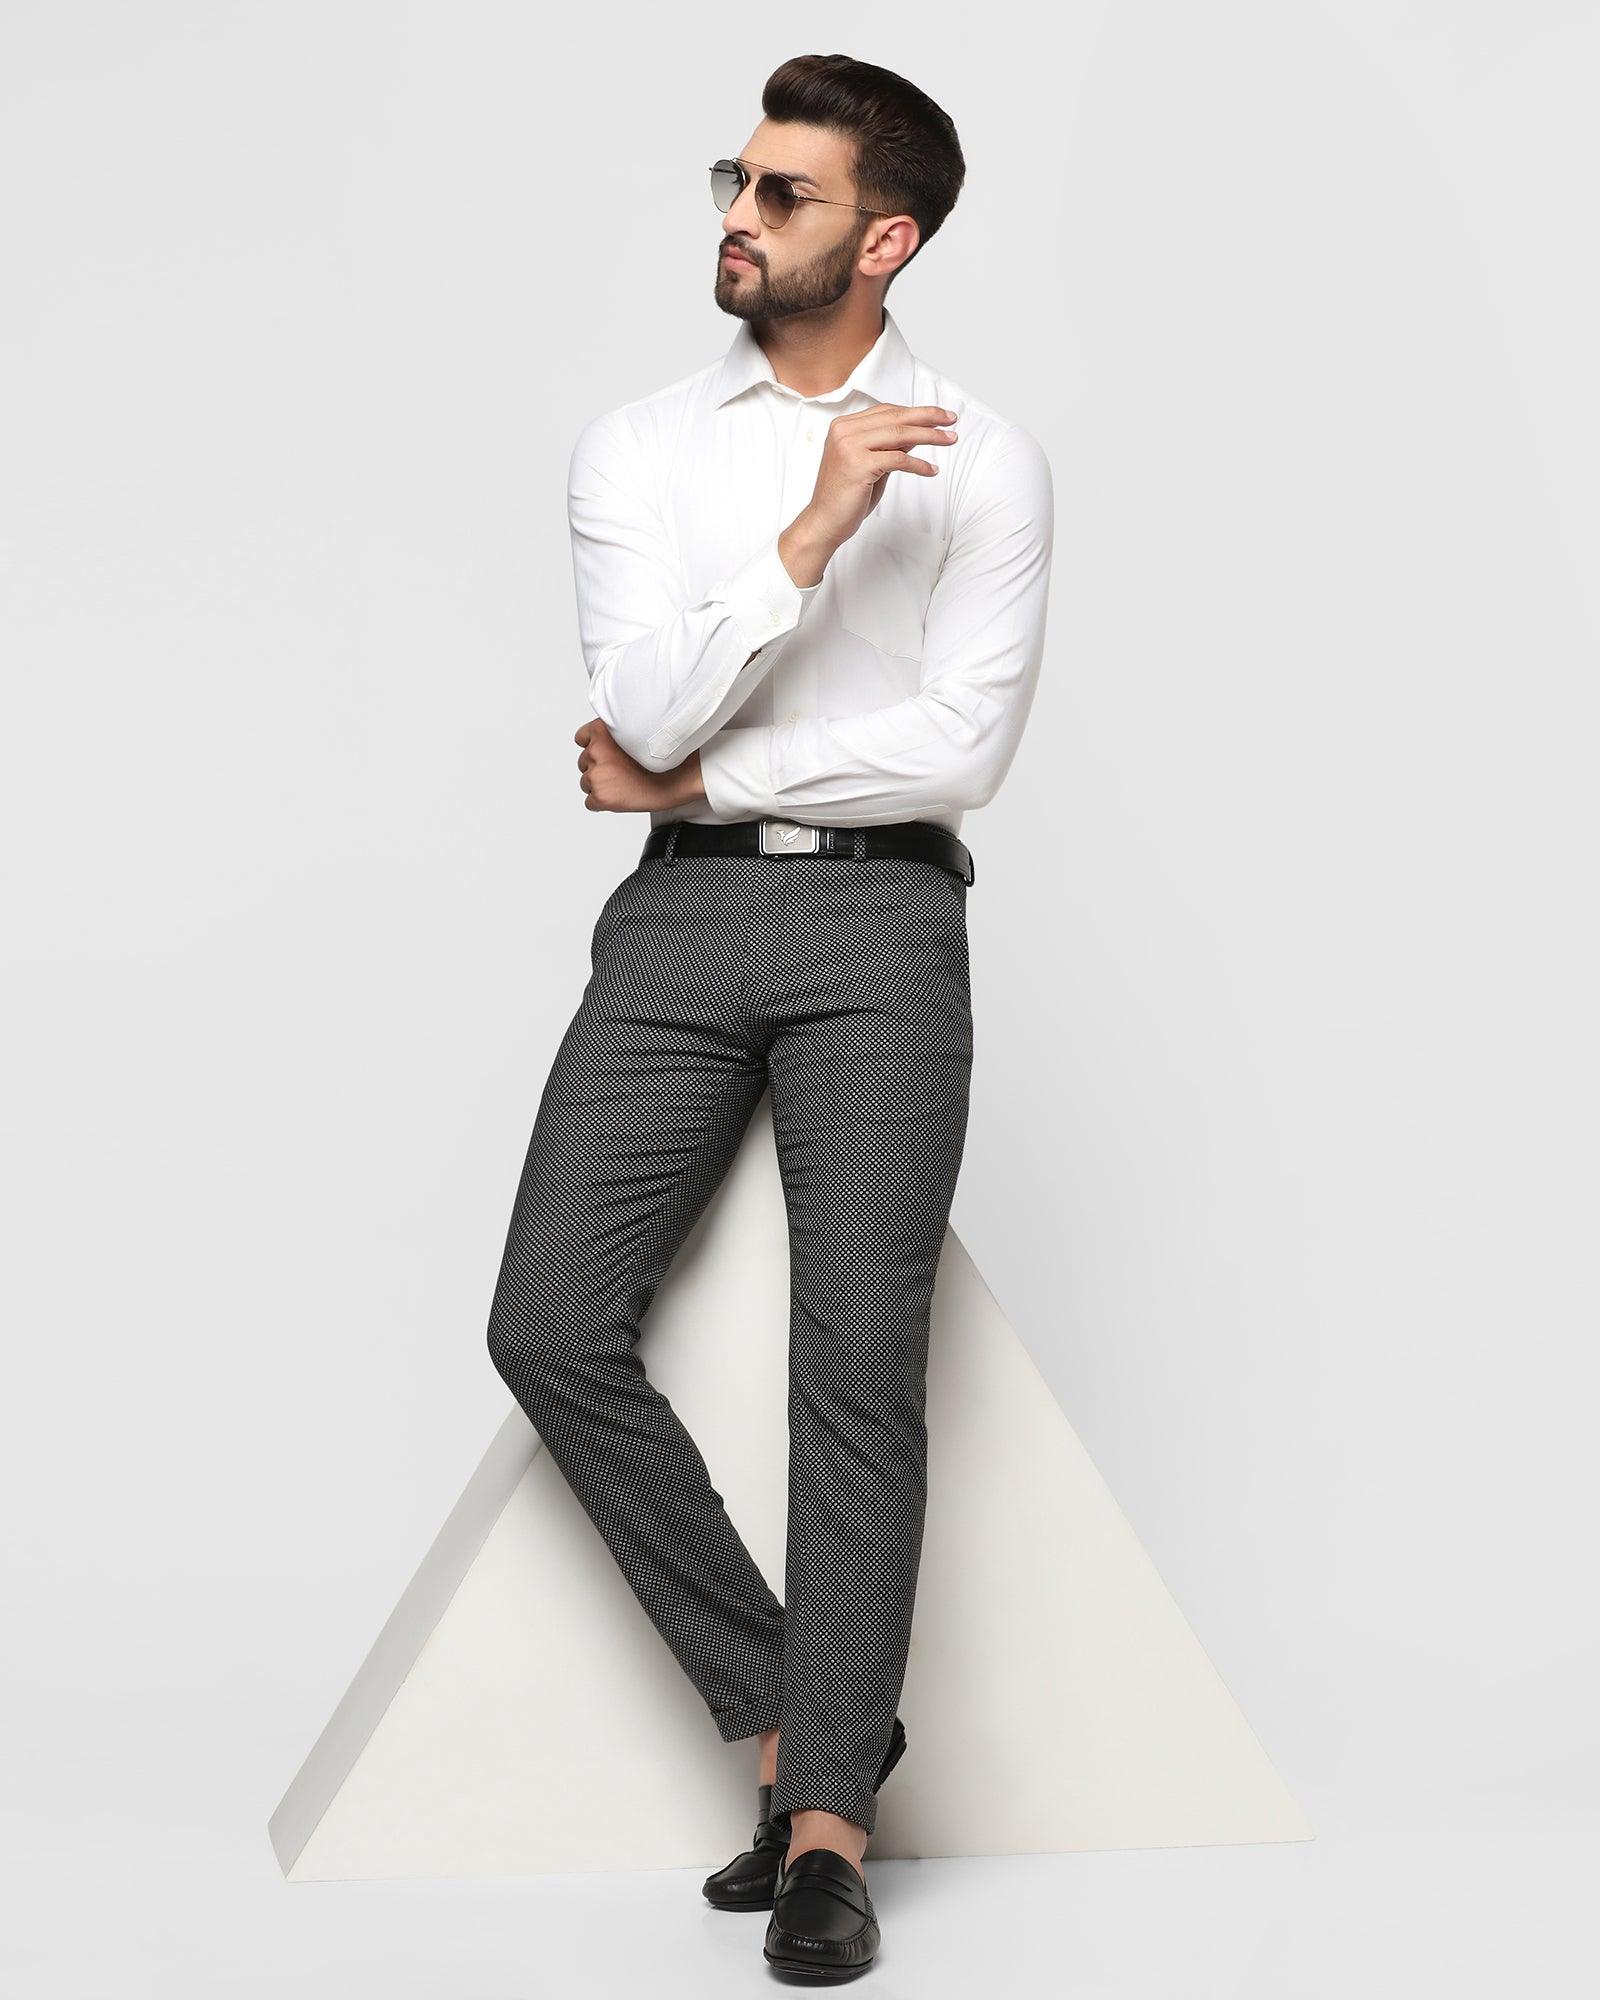 Formal White Solid Shirt - Alfed